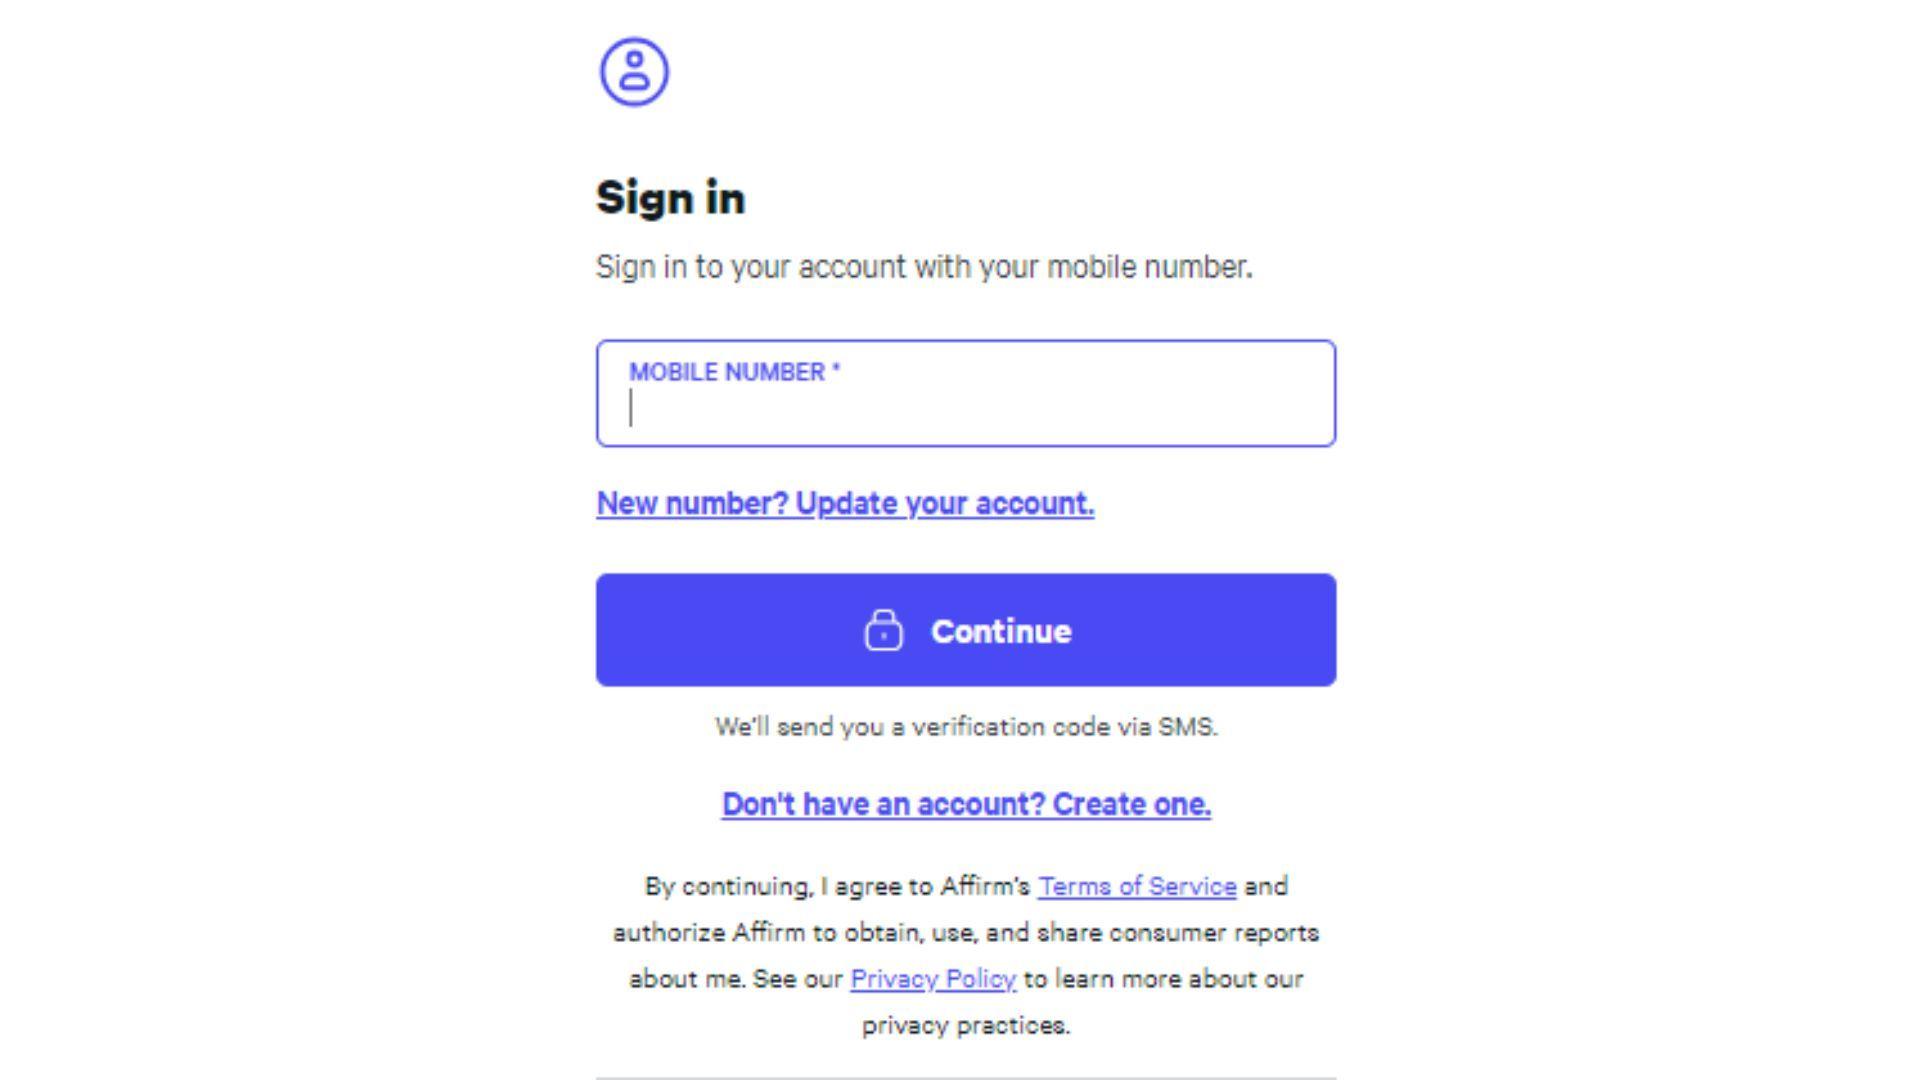 How to create a new account on the Affirm App?